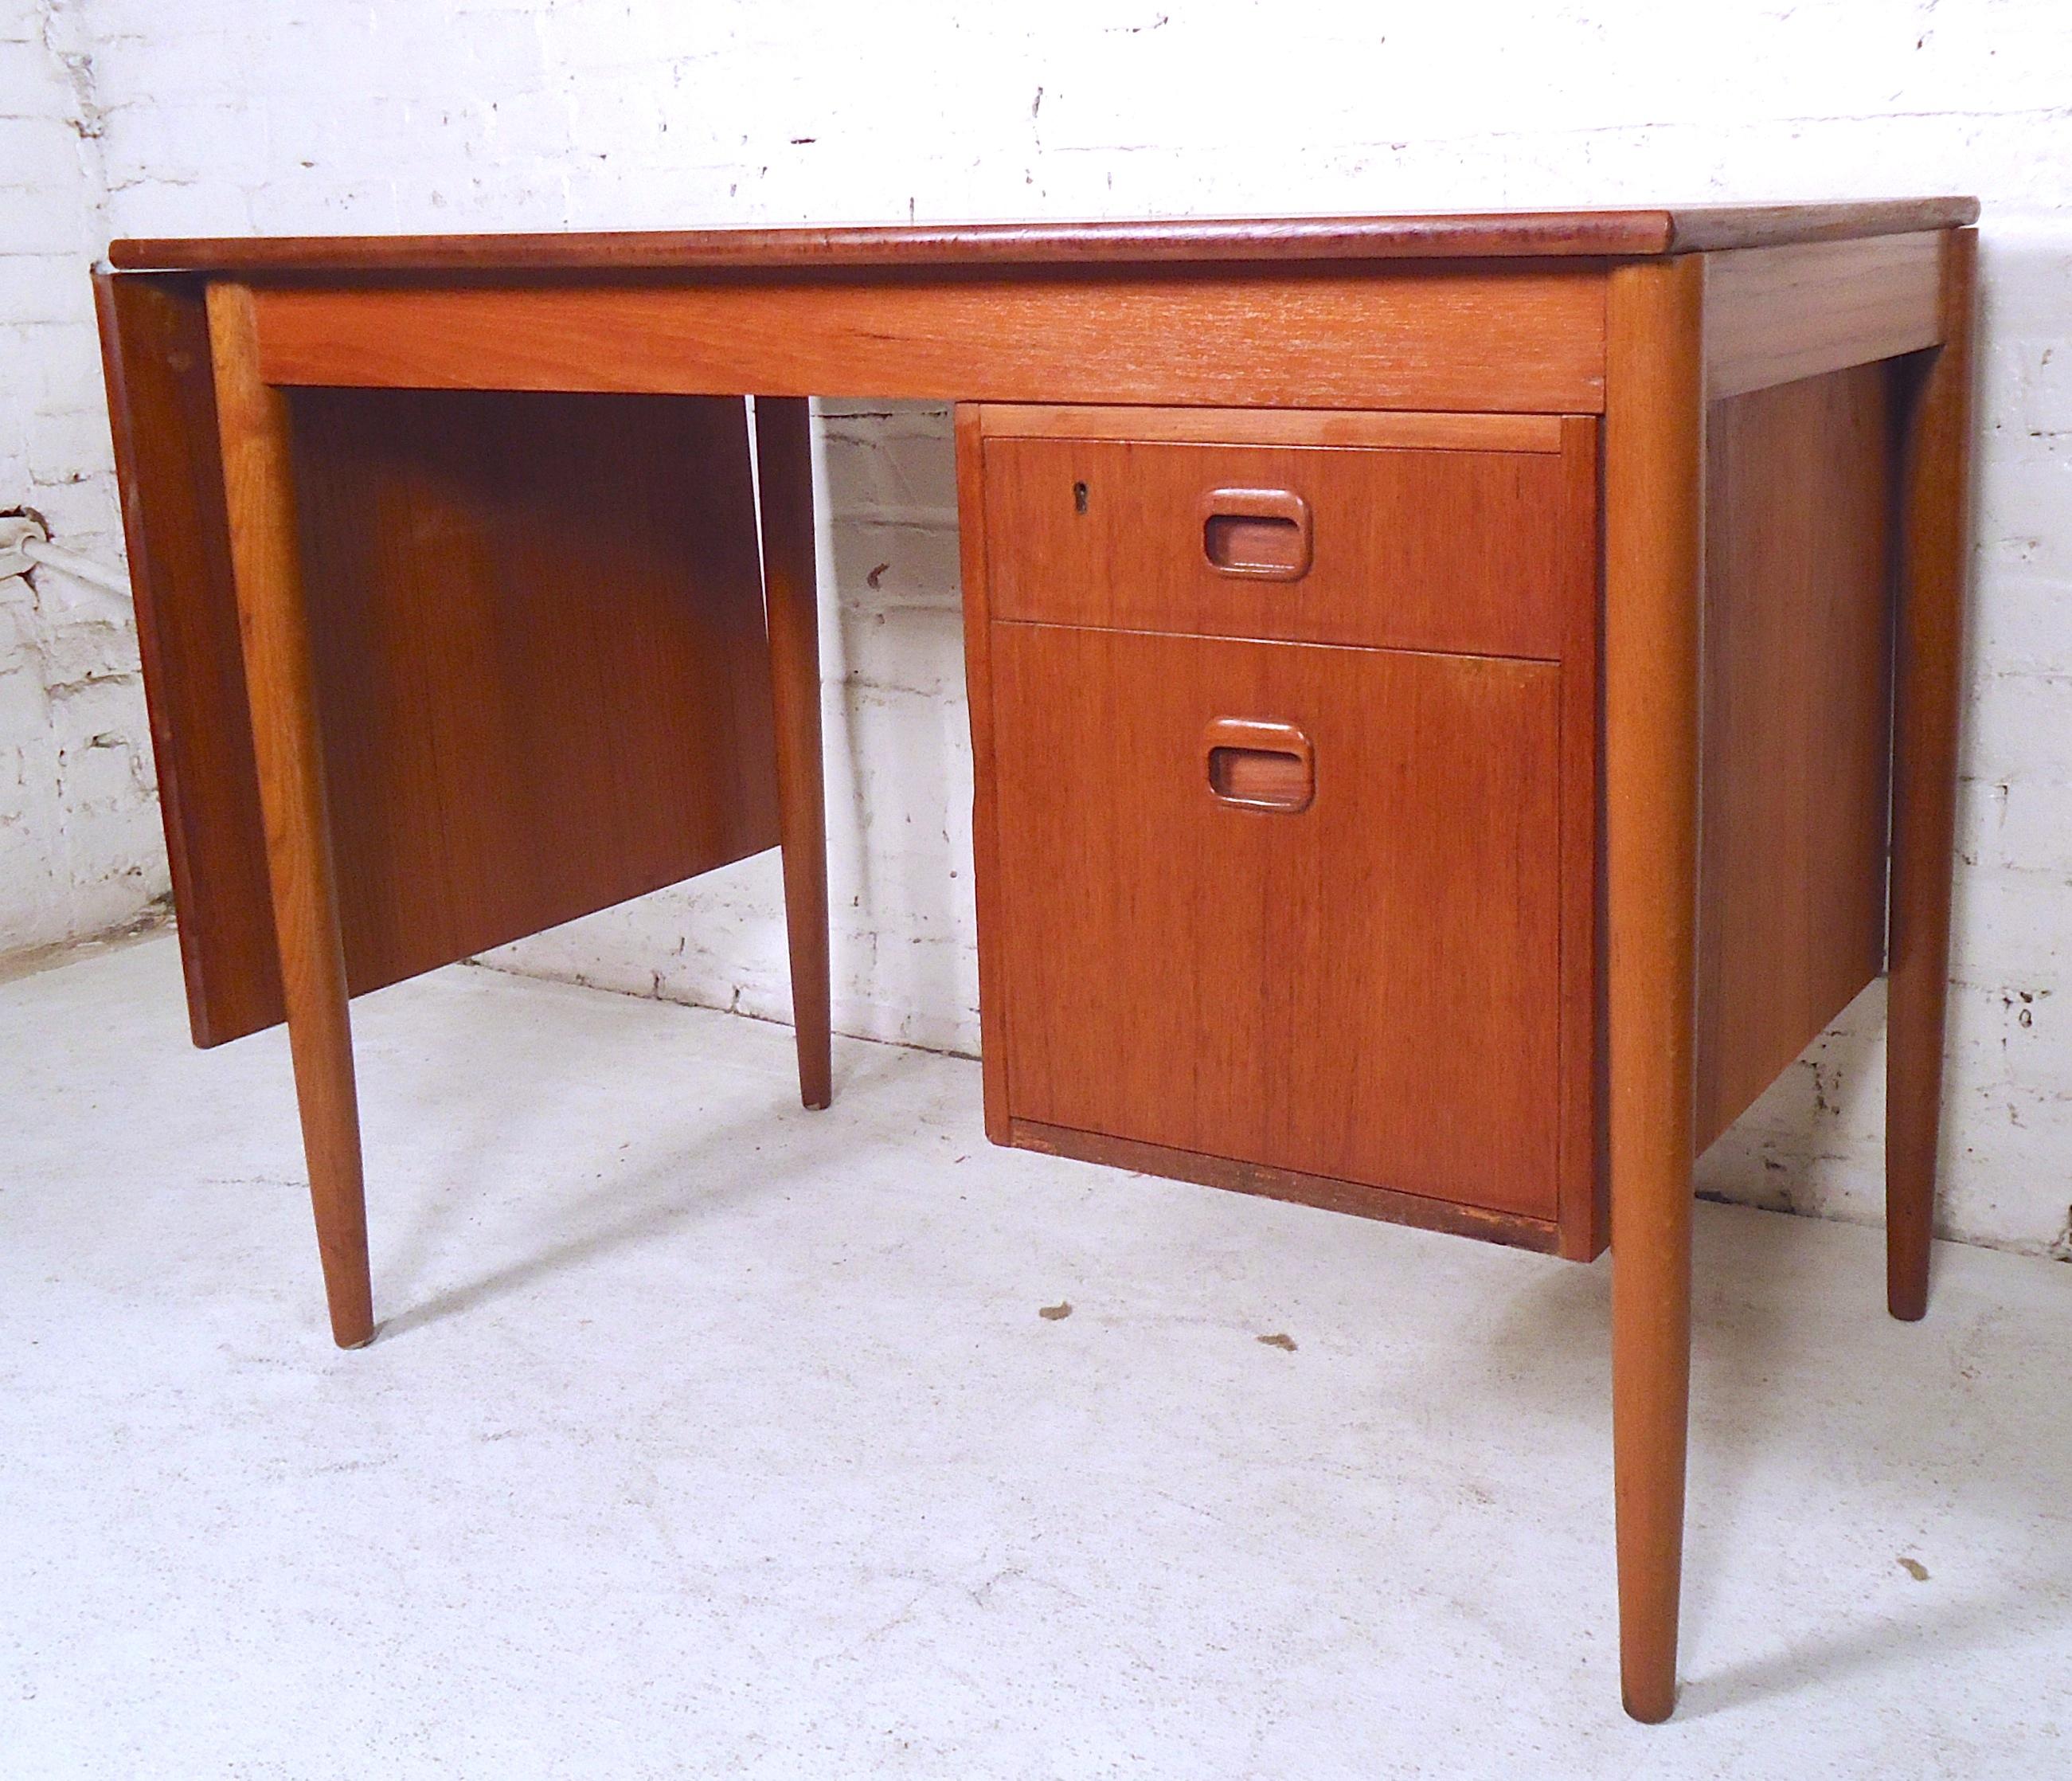 Stunning vintage modern desk features the unique ability to extend the width of the top by sliding it to the side. Beautiful teak wood grain, long tapered legs, and a finished back show quality craftsmanship. 

Please confirm item location (NY or